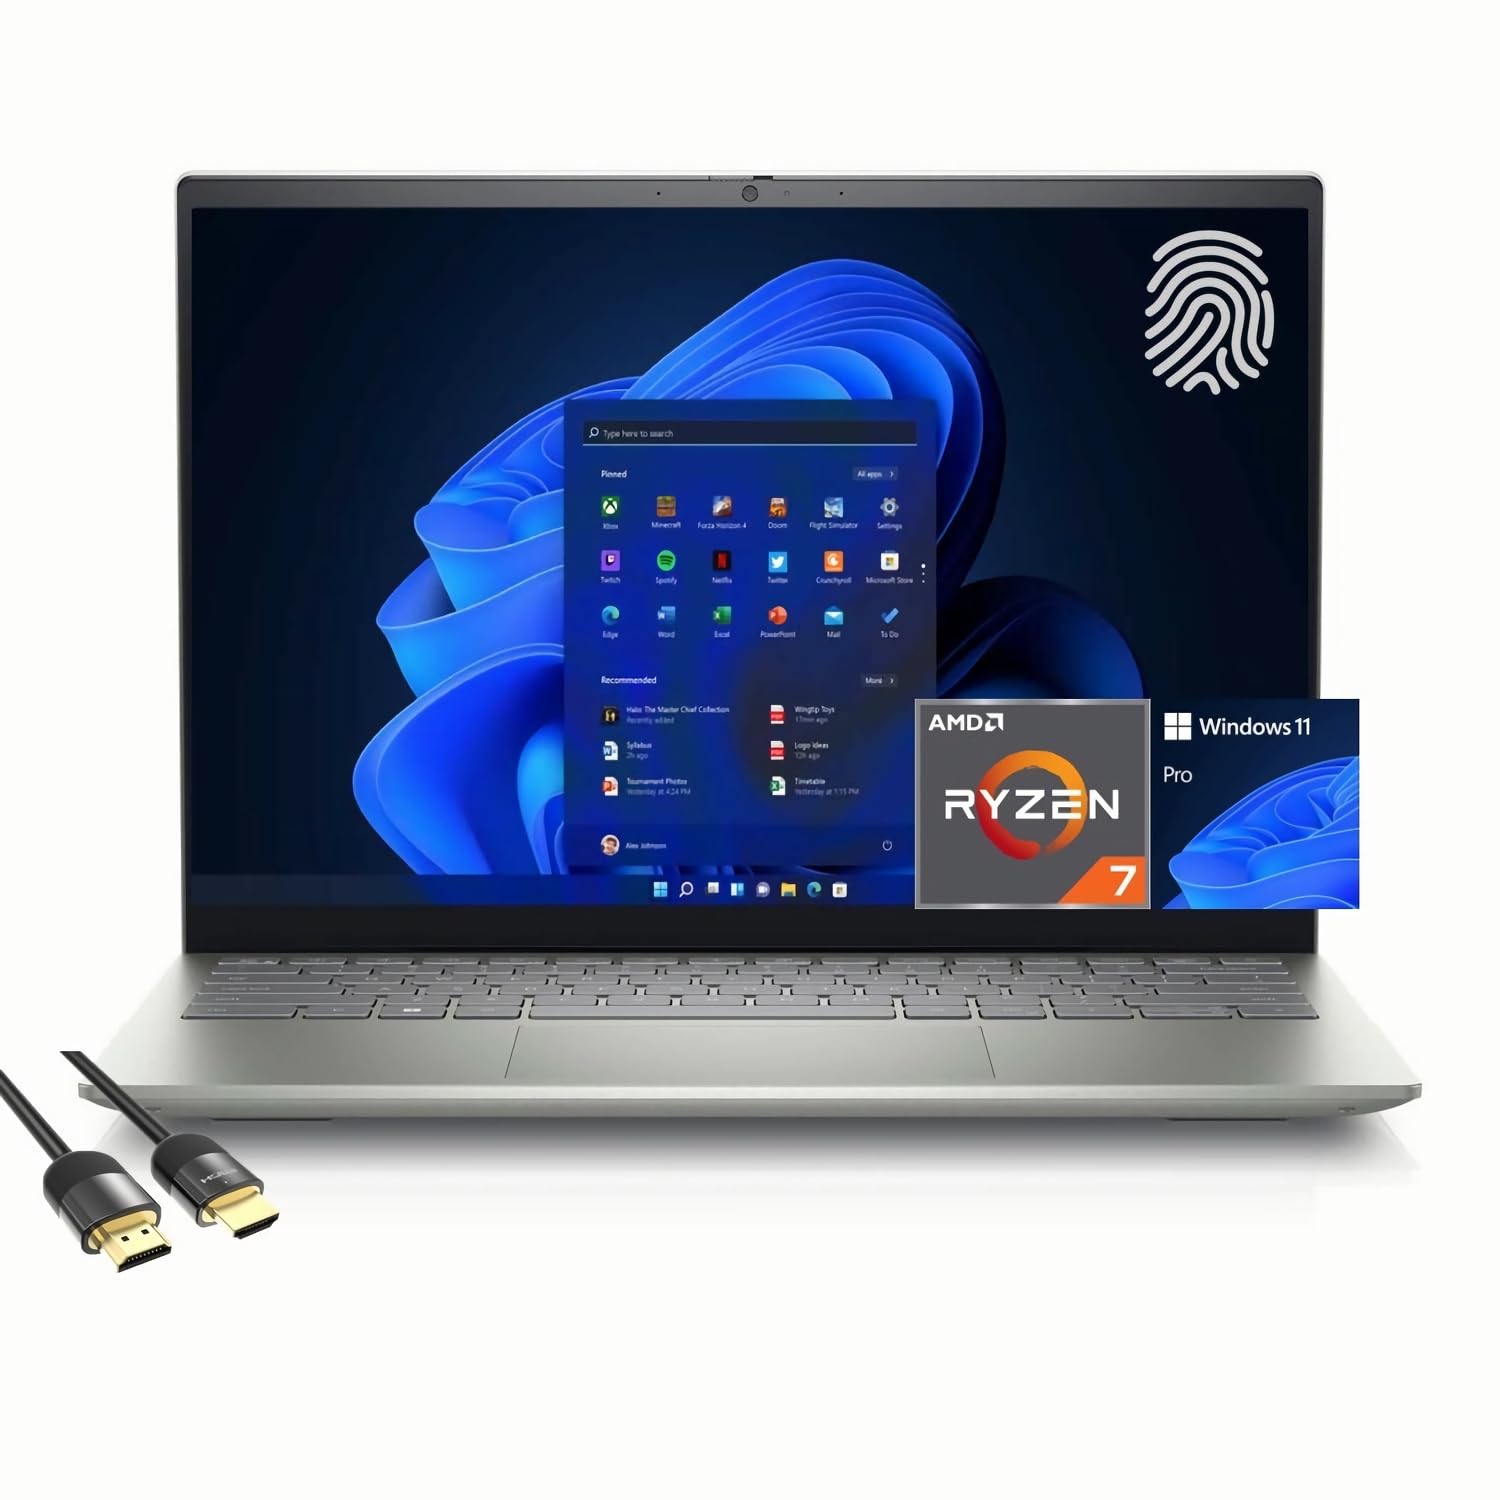 An image of a laptop with a Wi-Fi symbol and a USB cable.